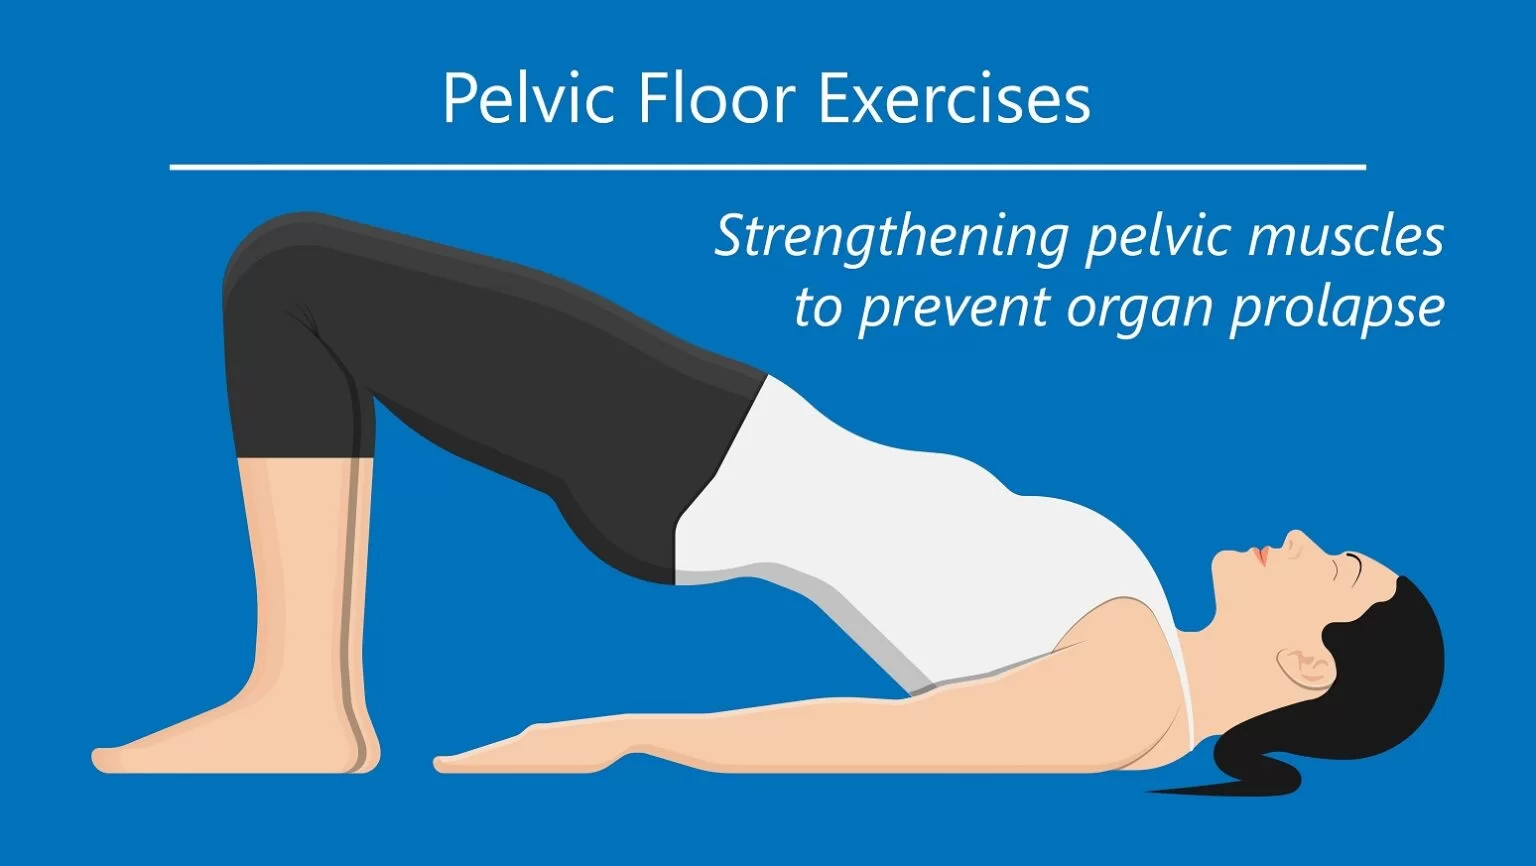 Patient on X: Pelvic floor exercises, also known as Kegel exercises,  aren't just for women as we're often led to believe. Kegel exercises can  also strengthen men's pelvic floor muscles and may